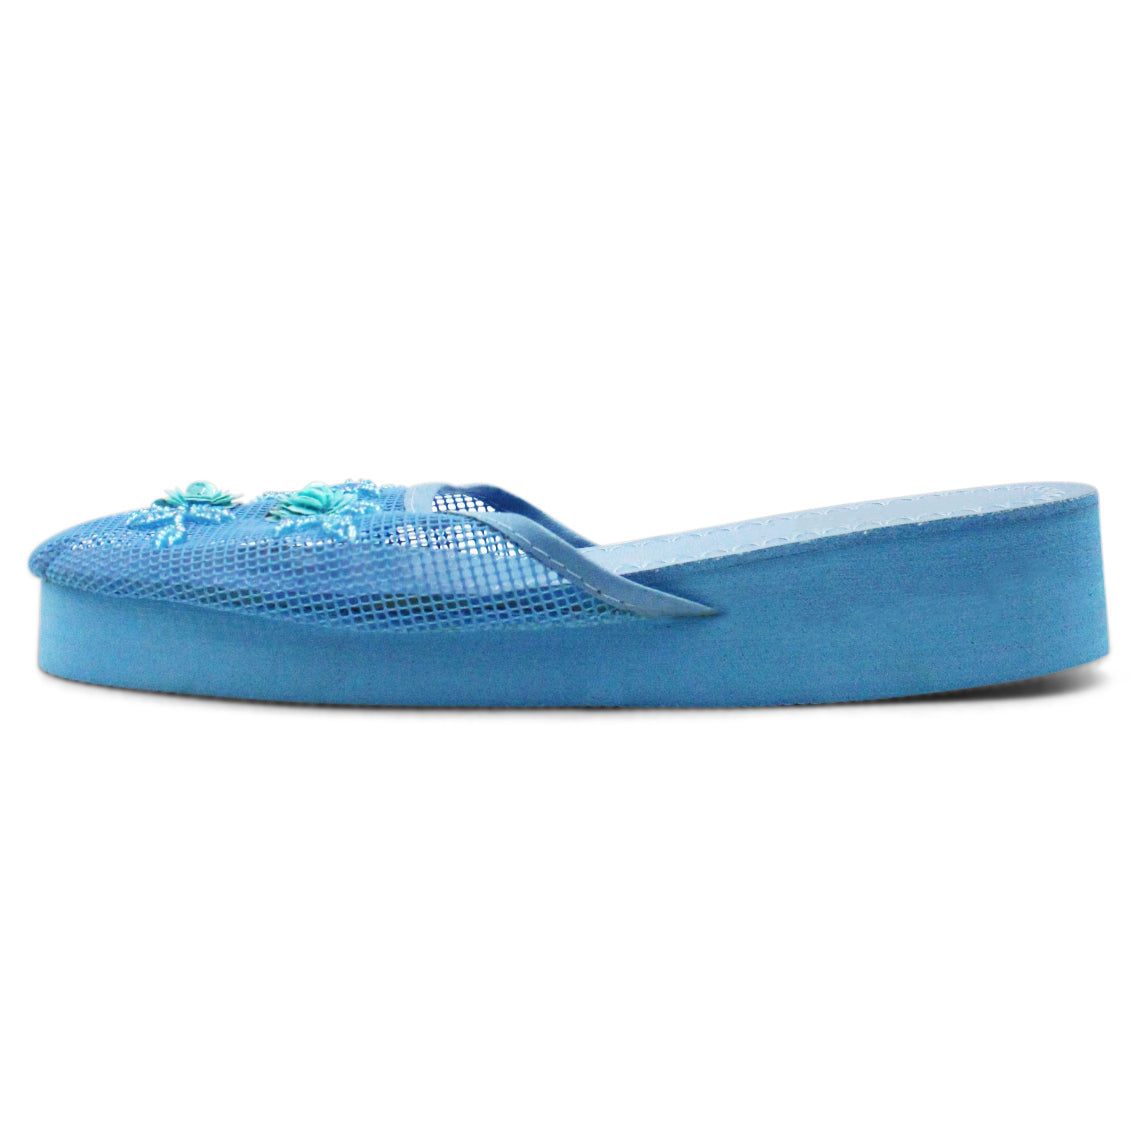 Wholesale Chinese Mesh Slippers | Bulk Sandals | Chinese Slippers